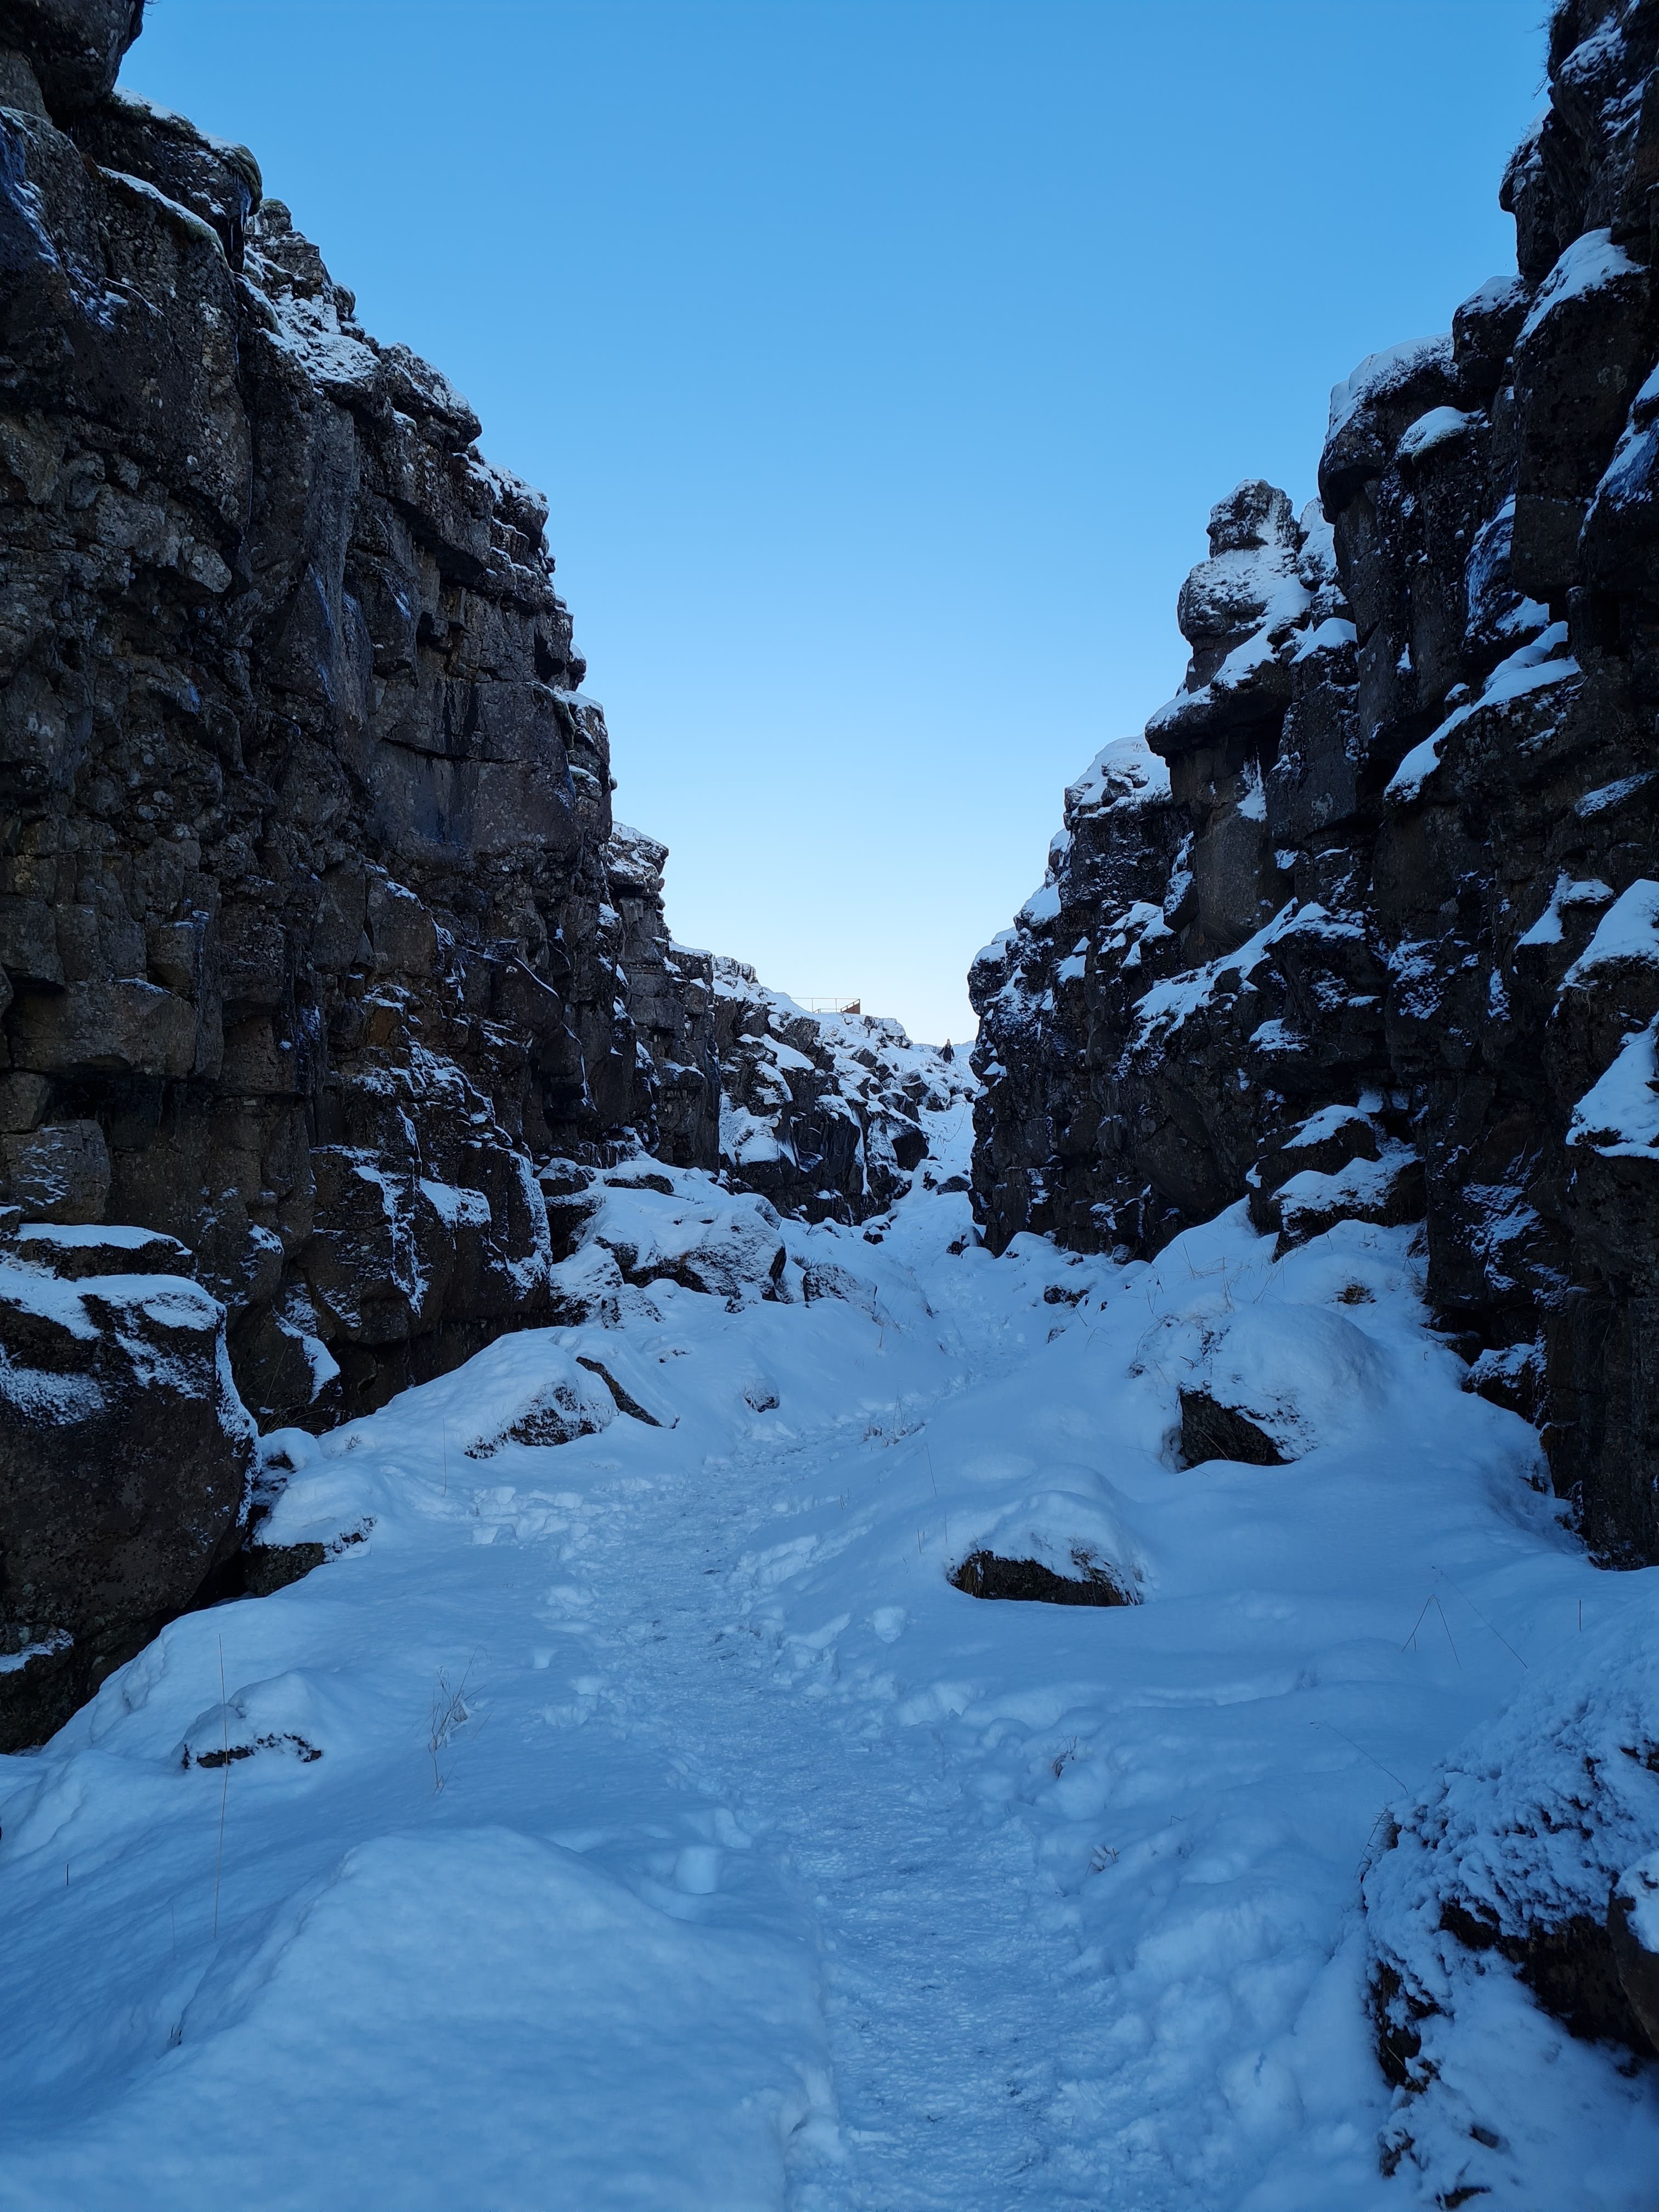 The snowy valley north american and eurasian tectonic plates